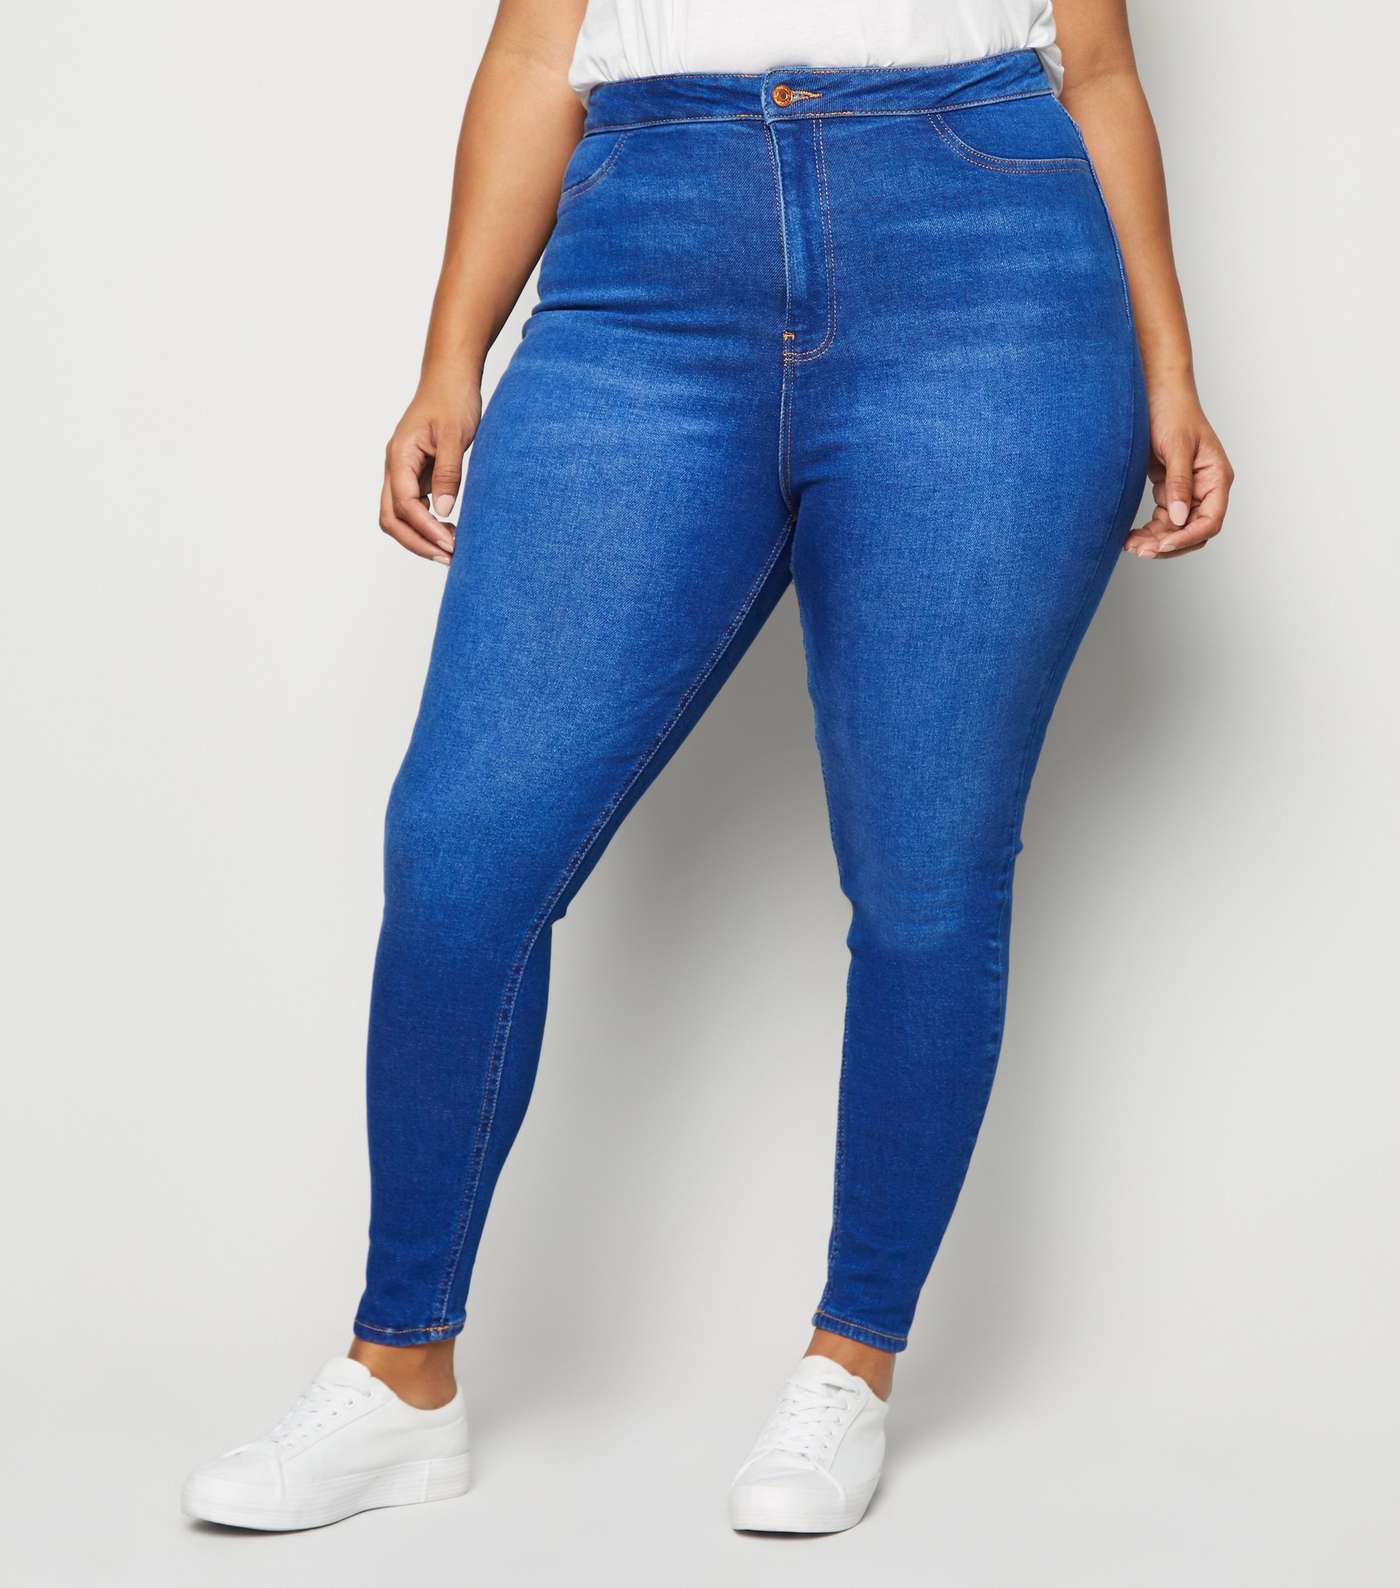 Curves Bright Blue High Waist Skinny Jeans Image 2